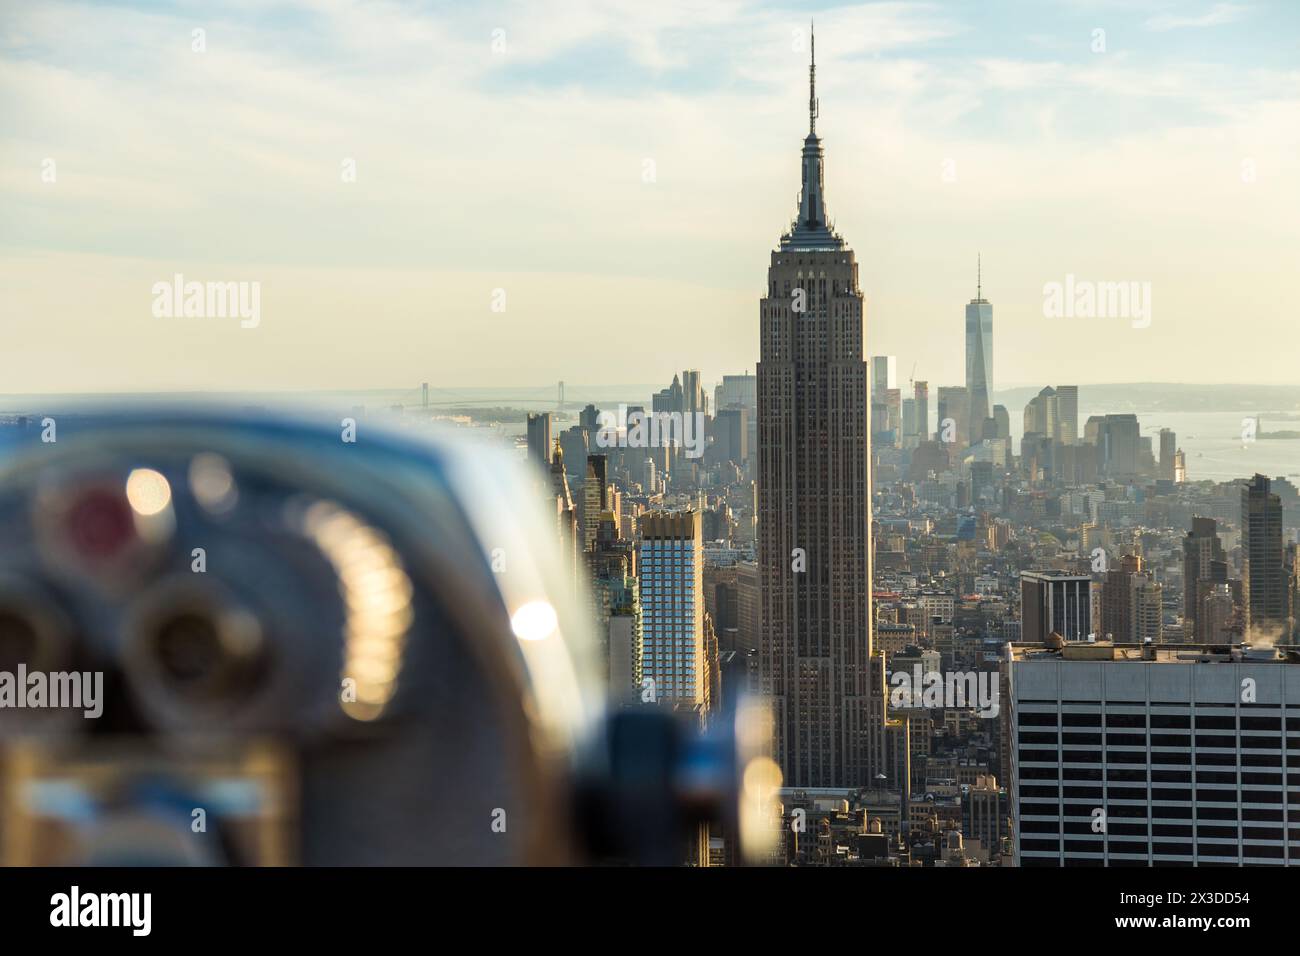 Coin operated telescope and view to Empire State Building & Manhattan, New York, USA Stock Photo